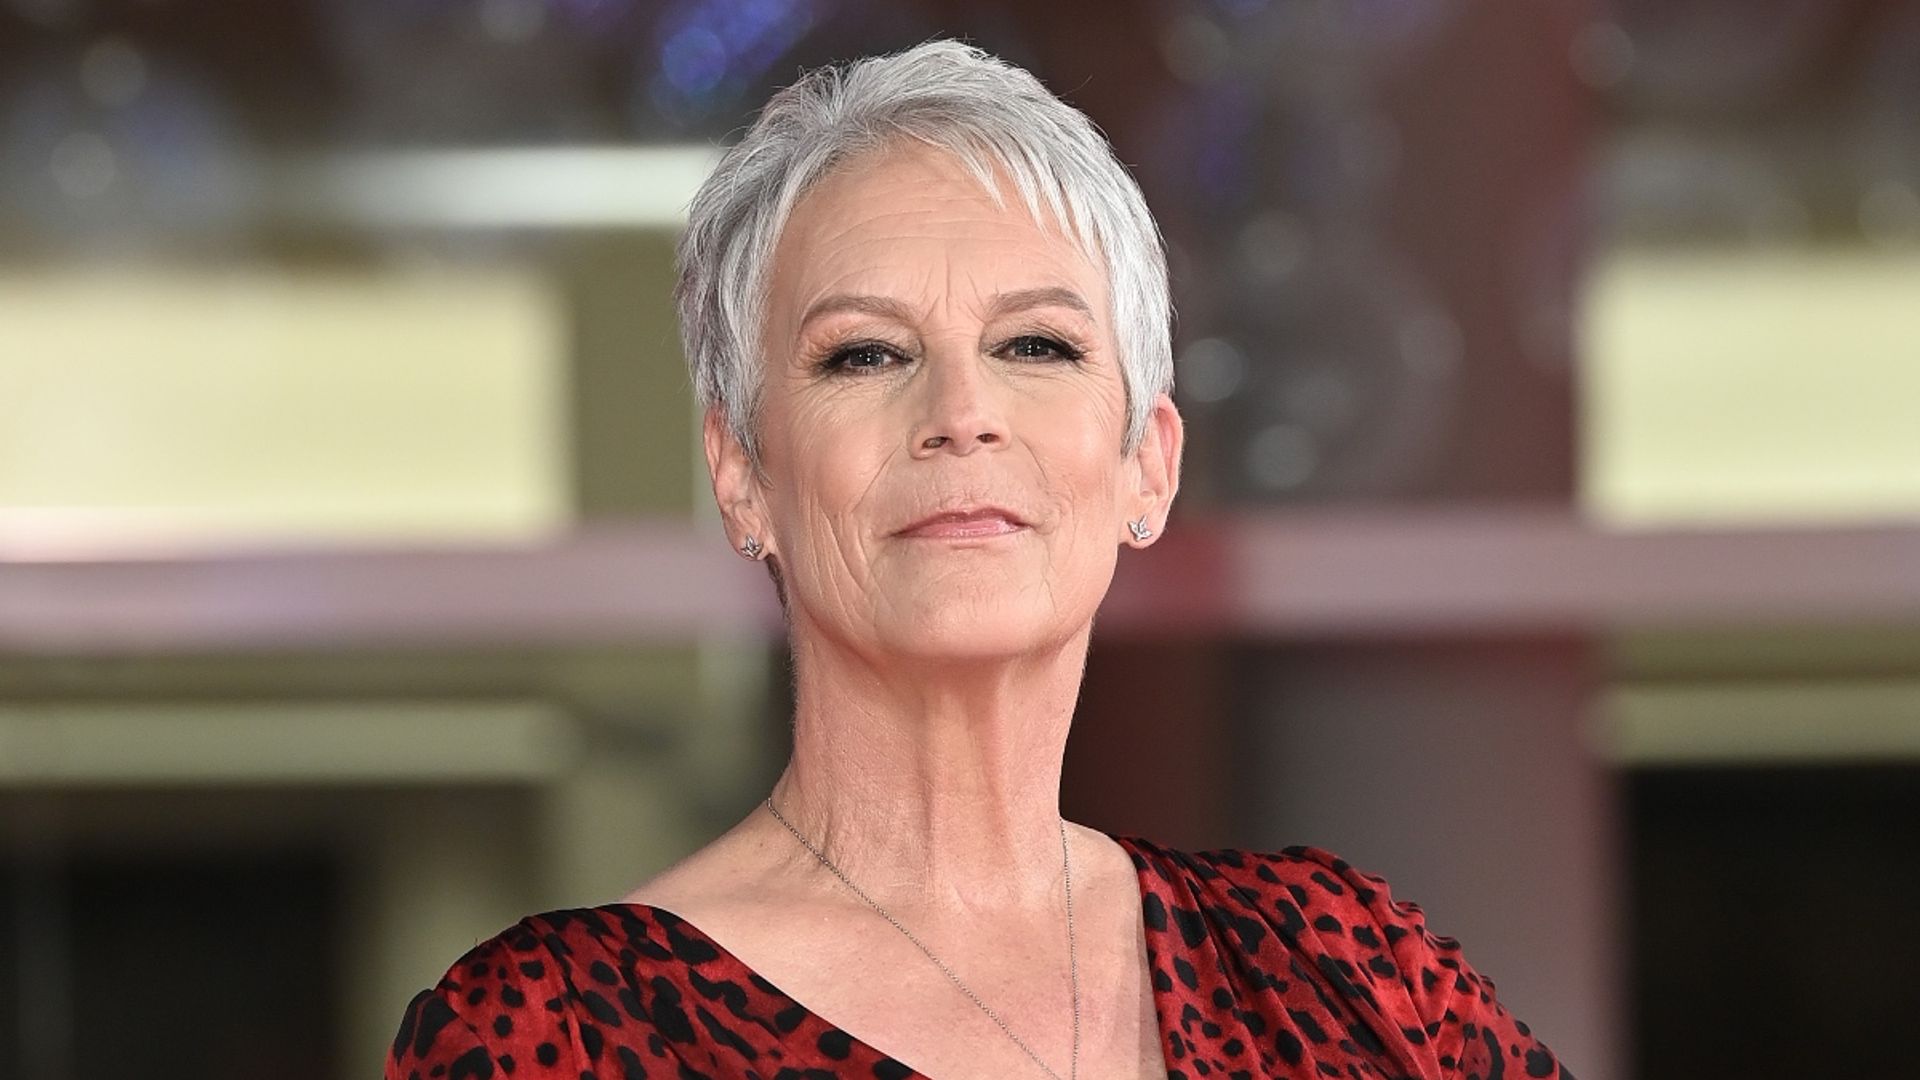 Jamie Lee Curtis shares unsettling baby photo that causes a stir | HELLO!